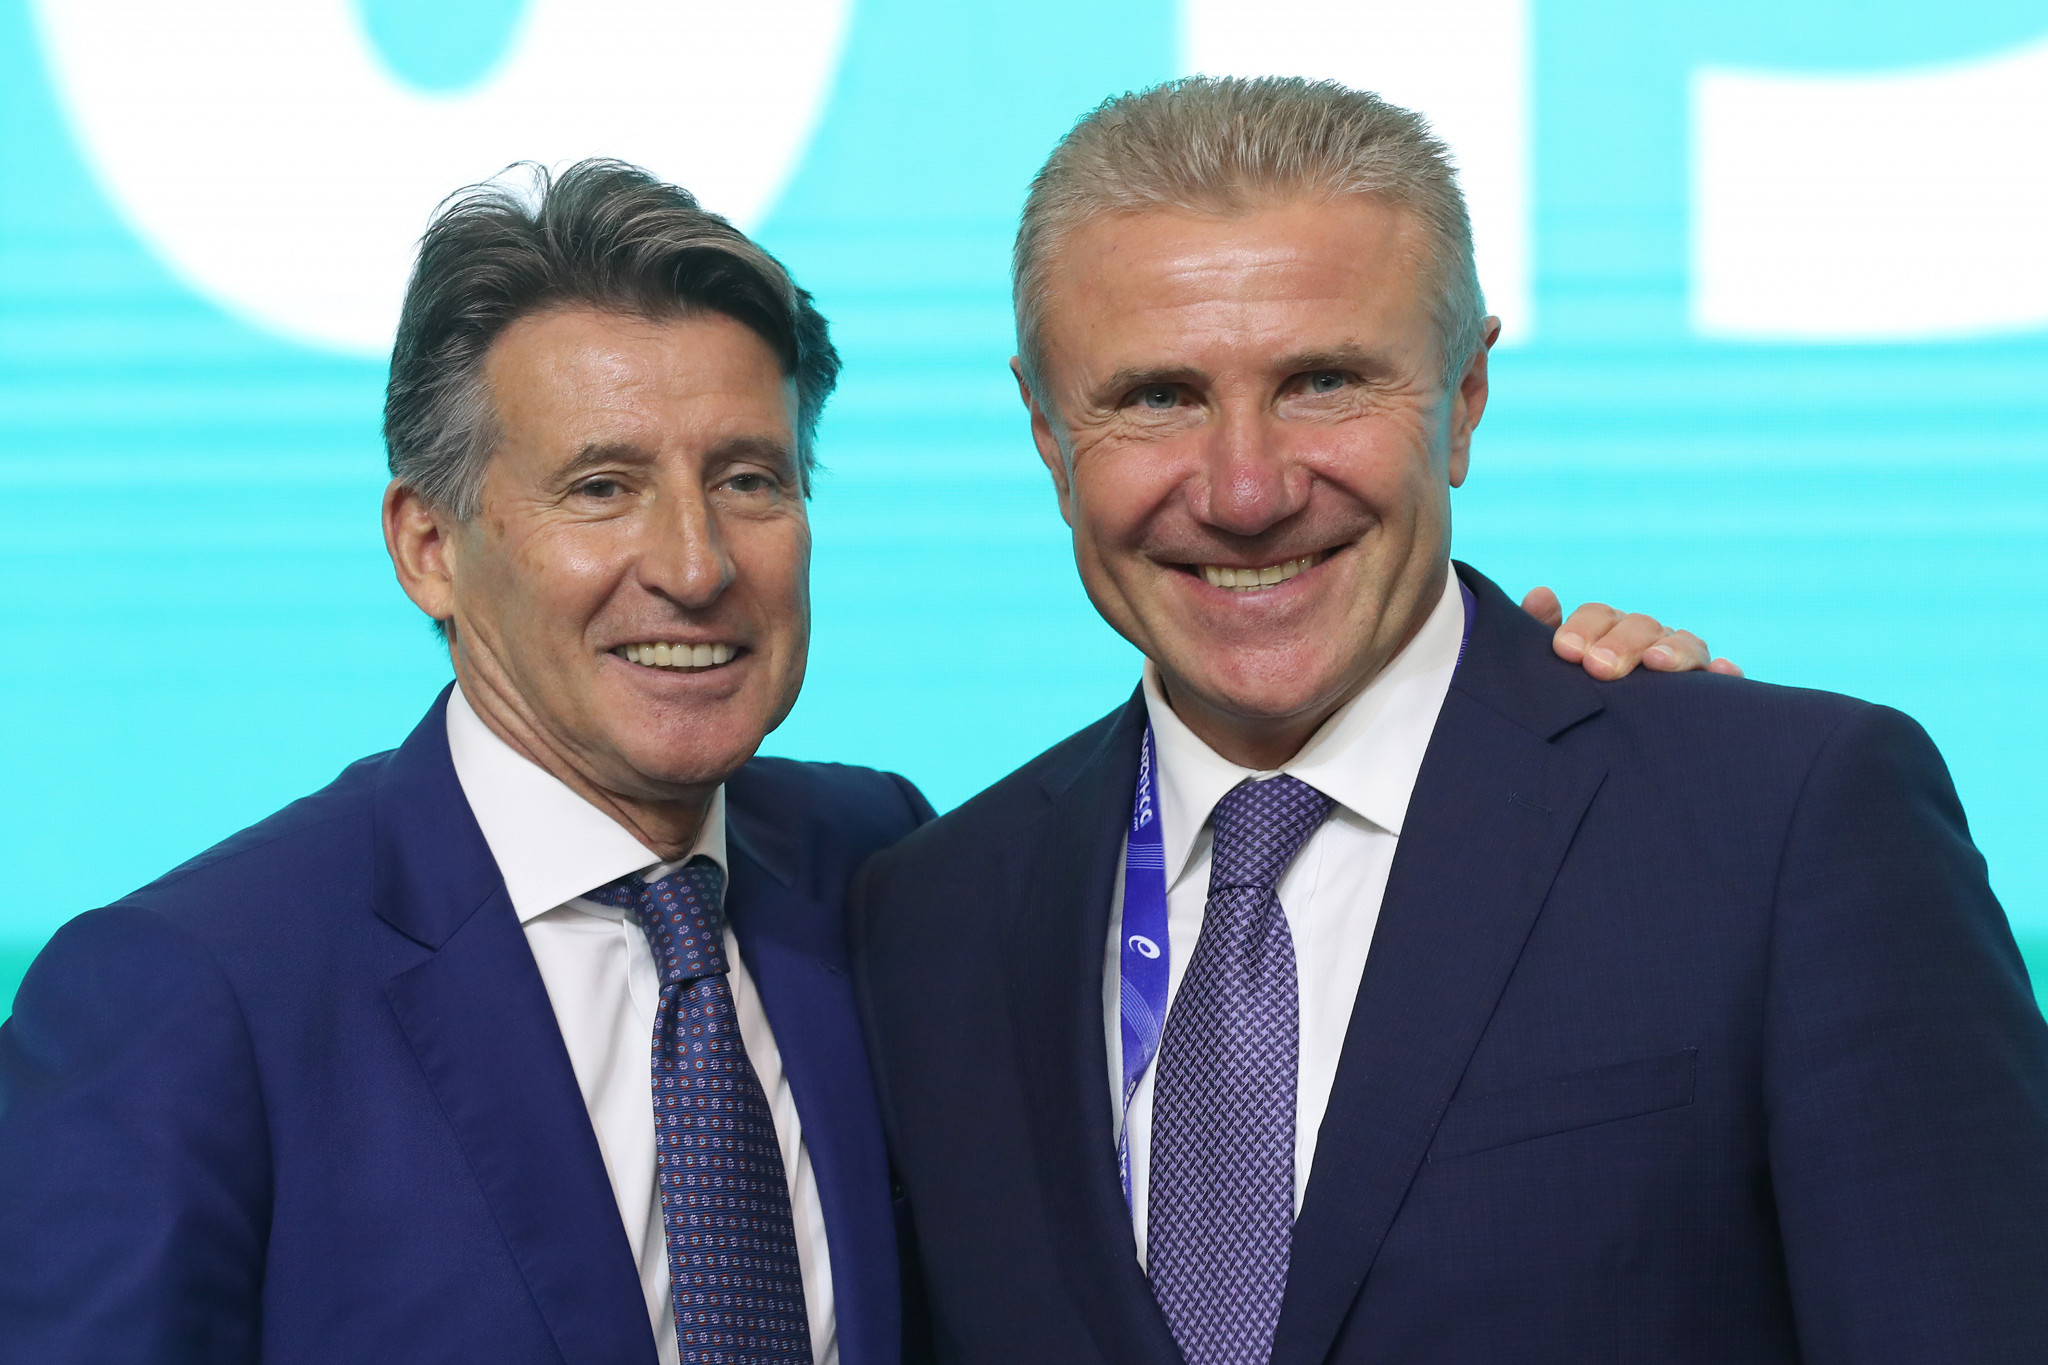 Among the first people to congratulate Sebastian Coe on his re-election as Ukraine's Sergey Bubka, the man he had beaten in Beijing four years ago ©Getty Images